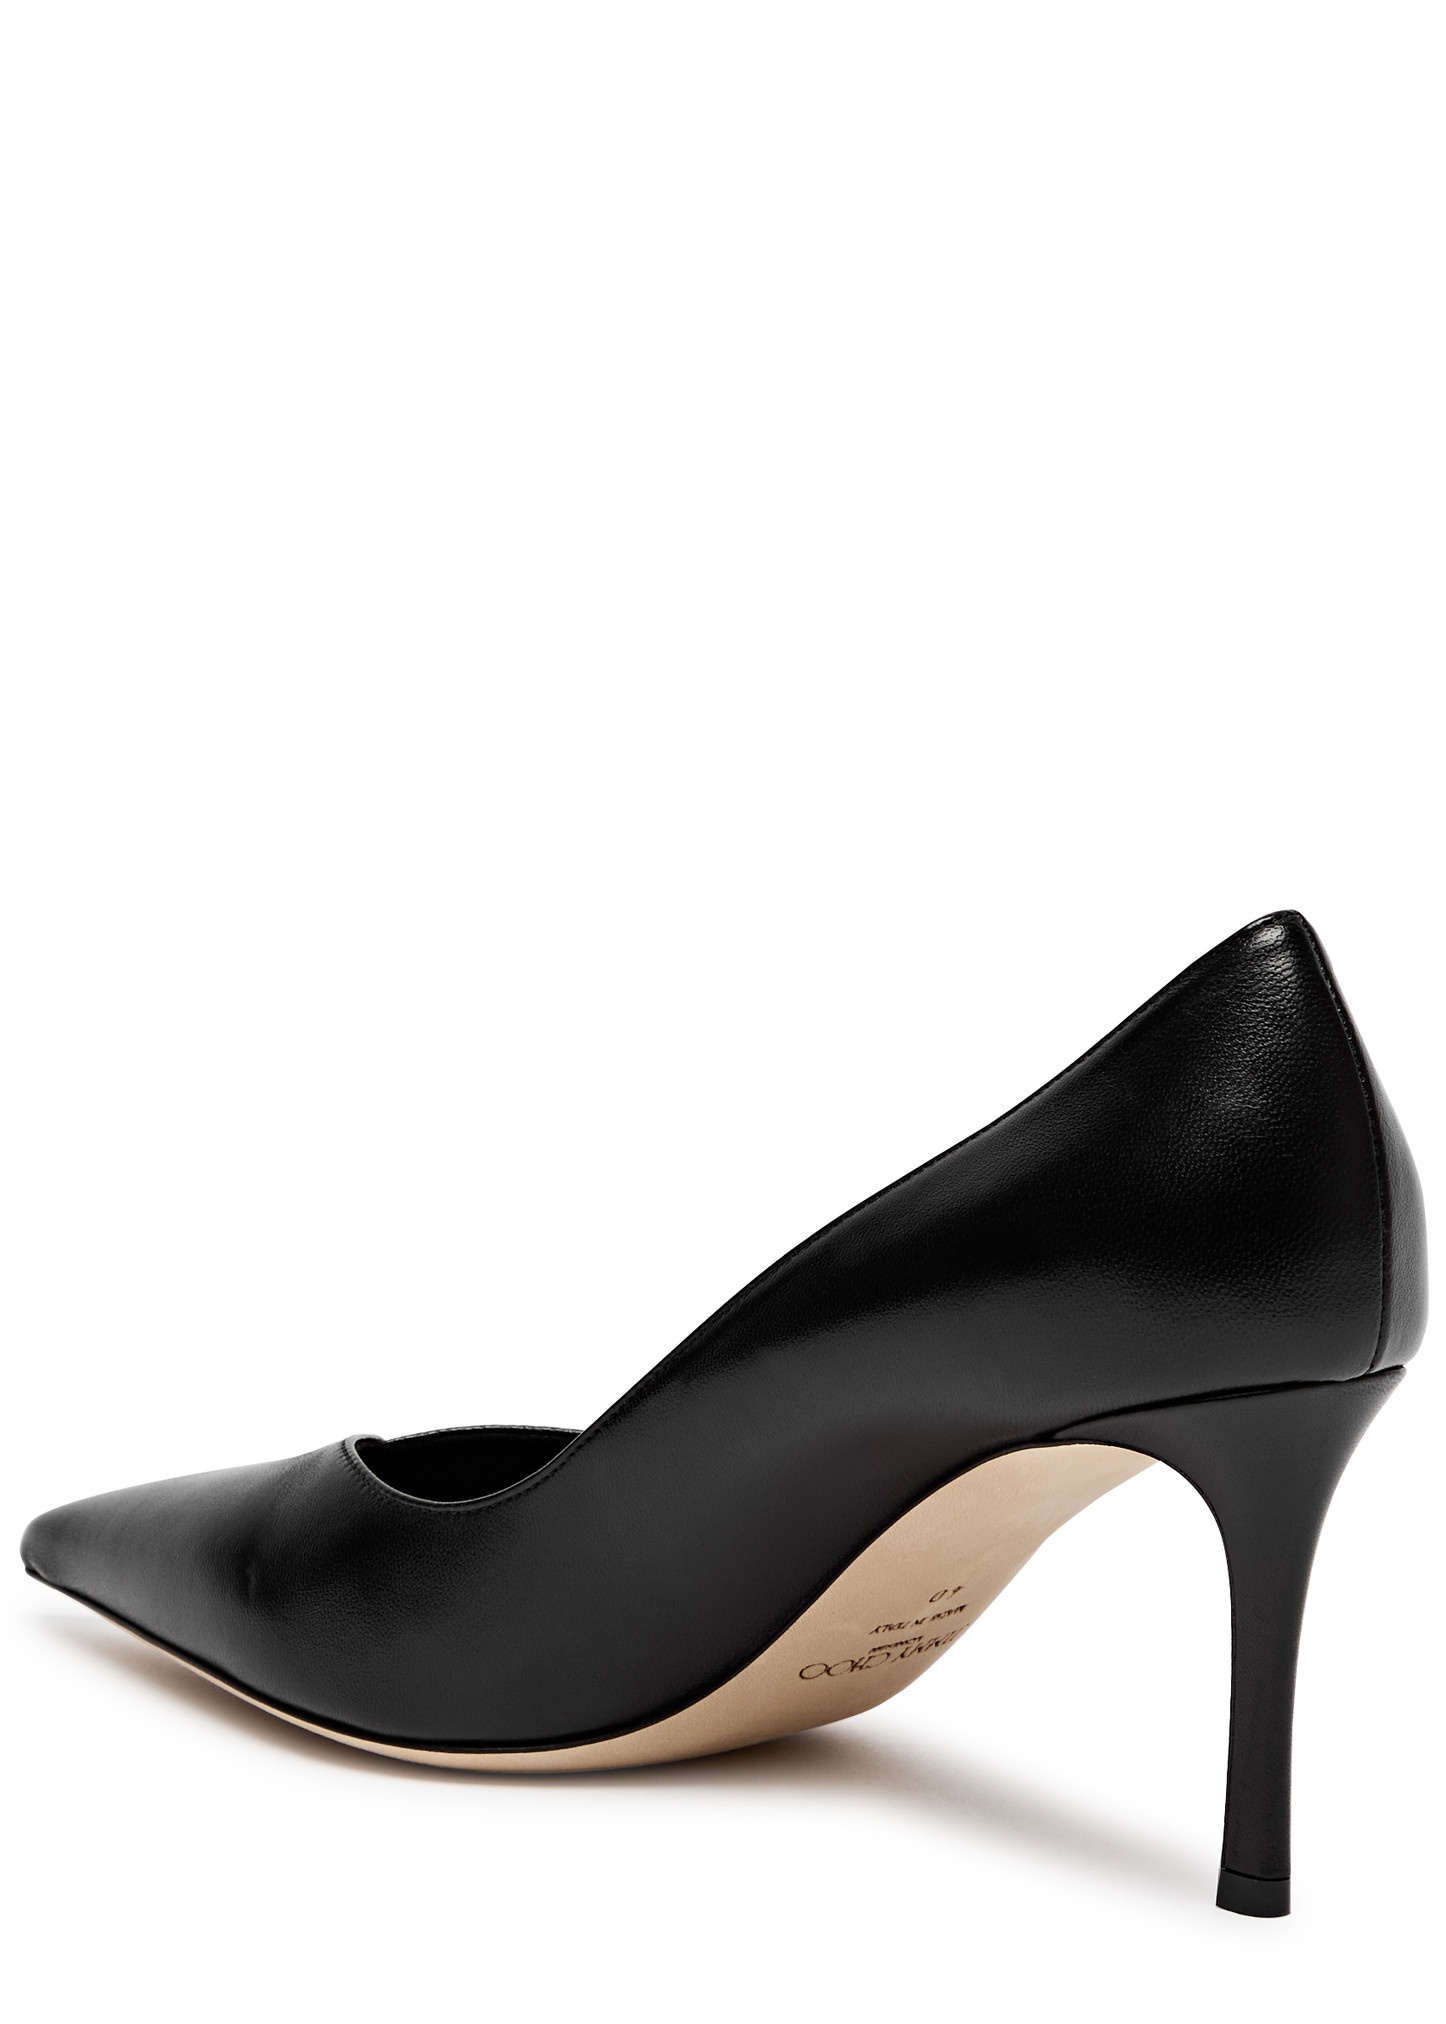 Cass 75 panelled leather pumps - 2